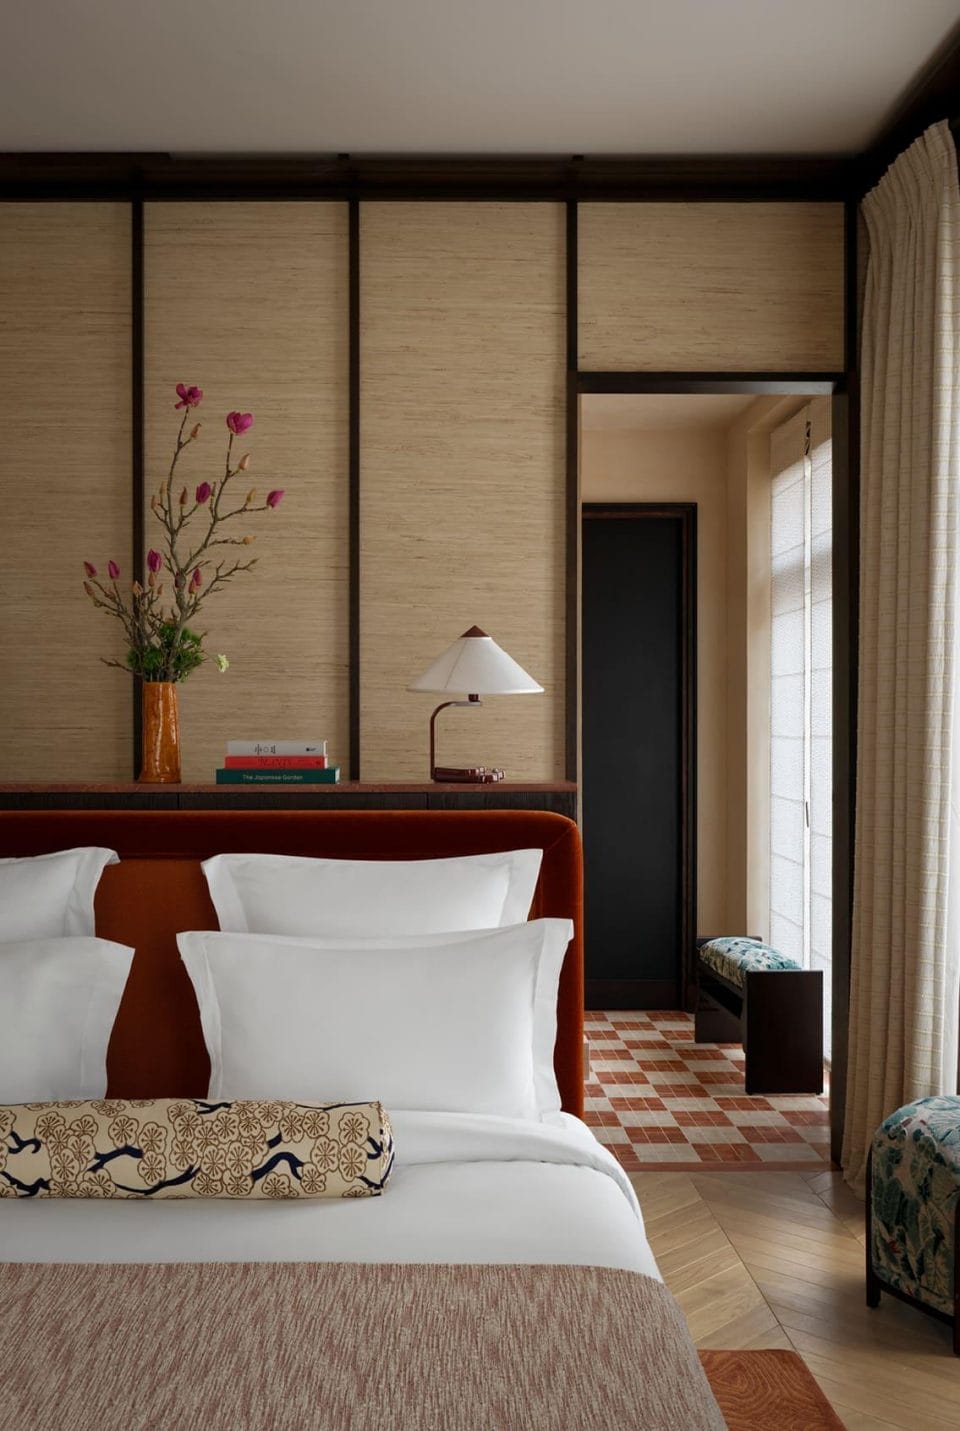 Minimalist Interiors Need Not Be Stale, Says These New Design Hotels